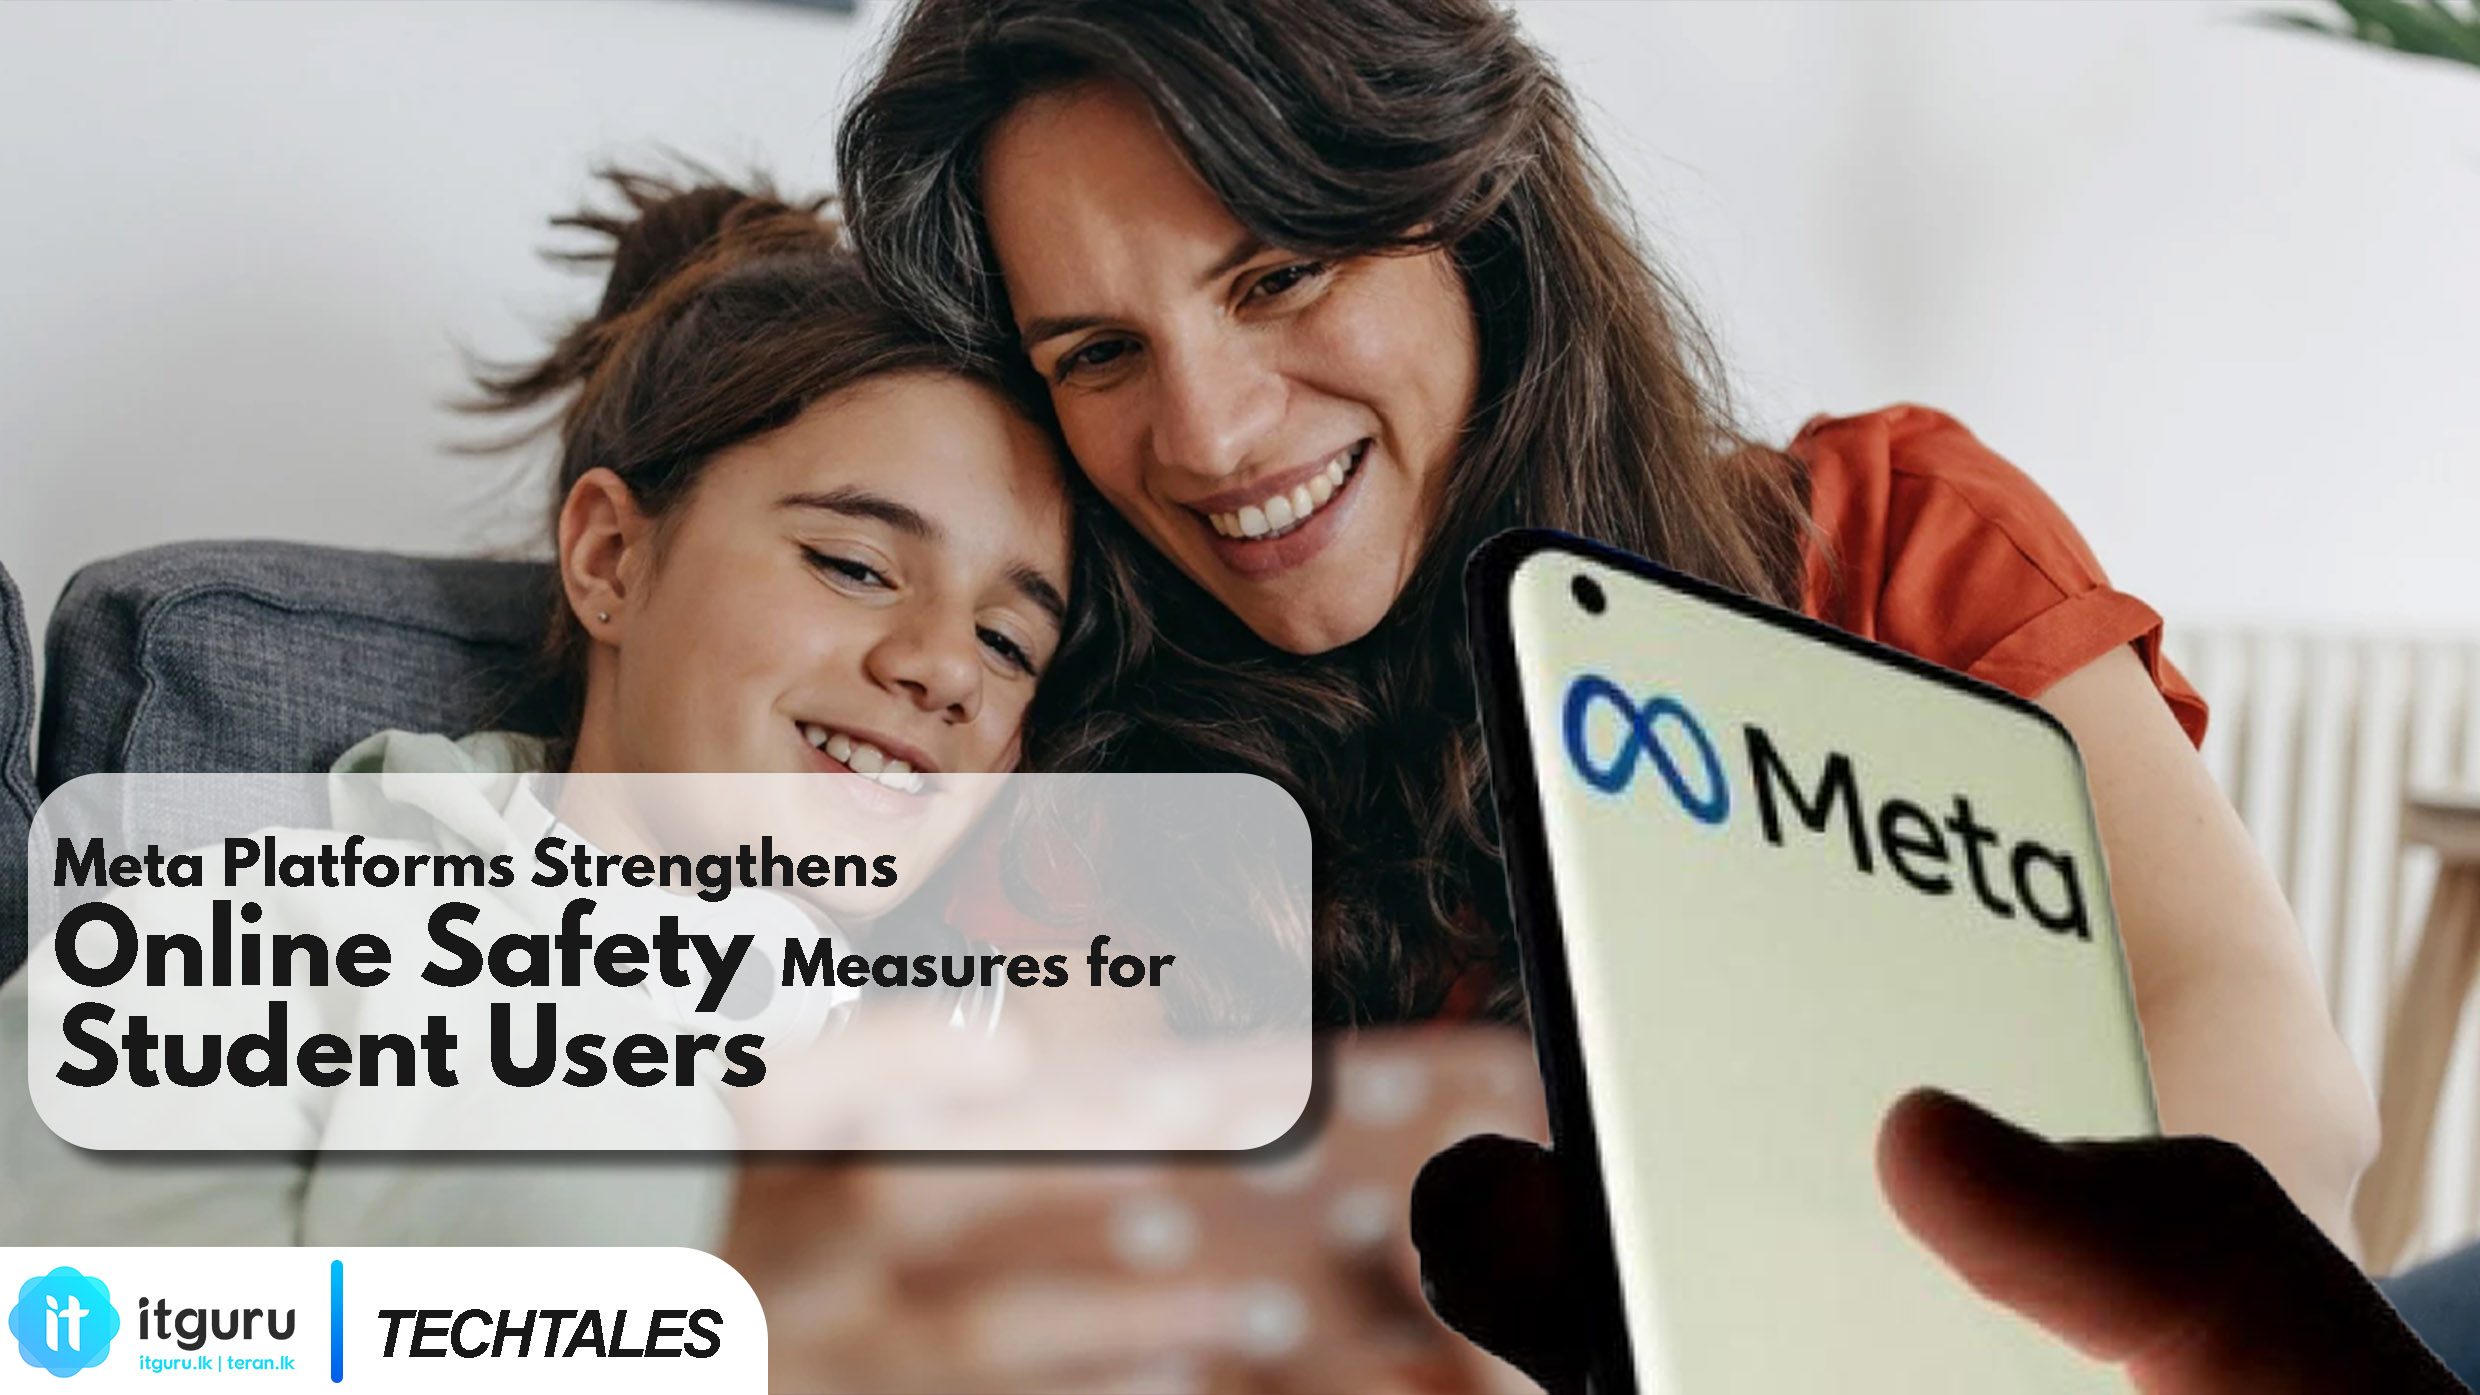 Meta Platforms Strengthens Online Safety Measures for Student Users